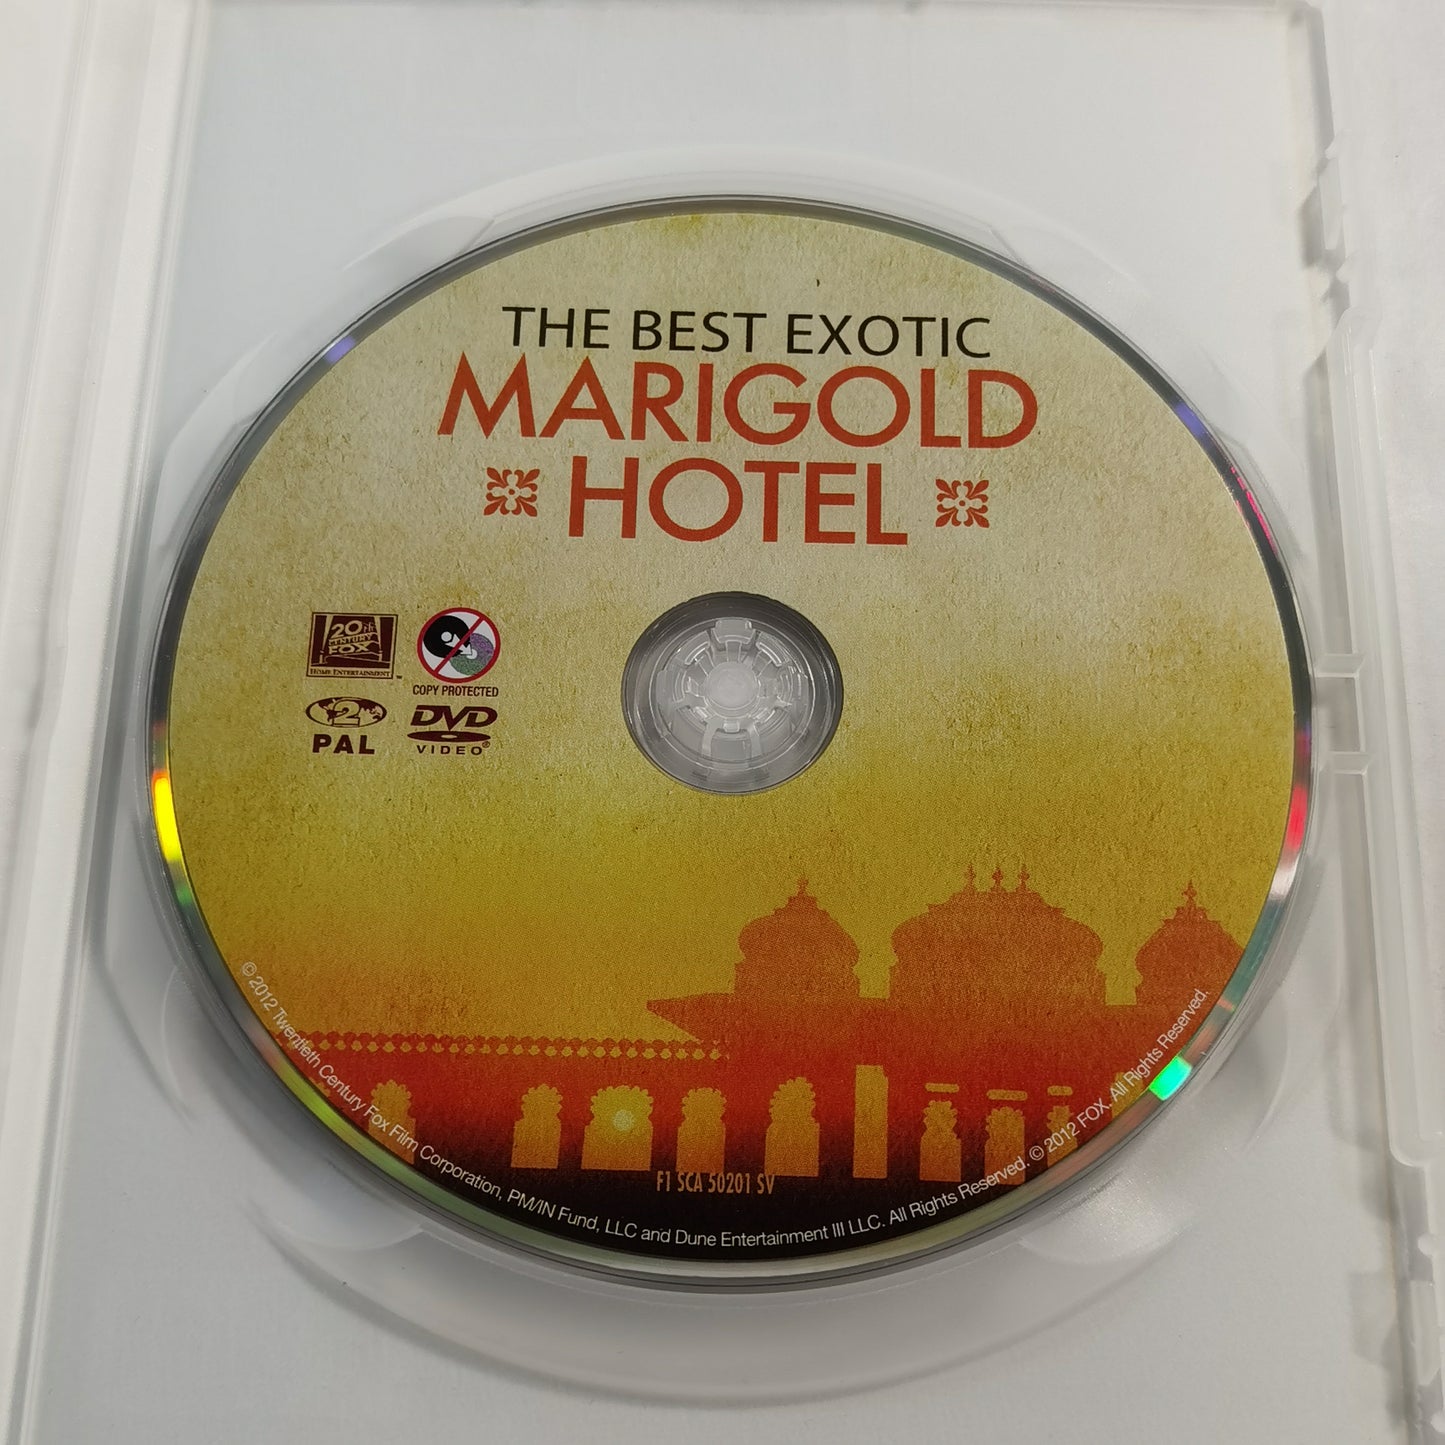 The Best Exotic Marigold Hotel ( Hotell Marigold ) (2011) - DVD SE 2012